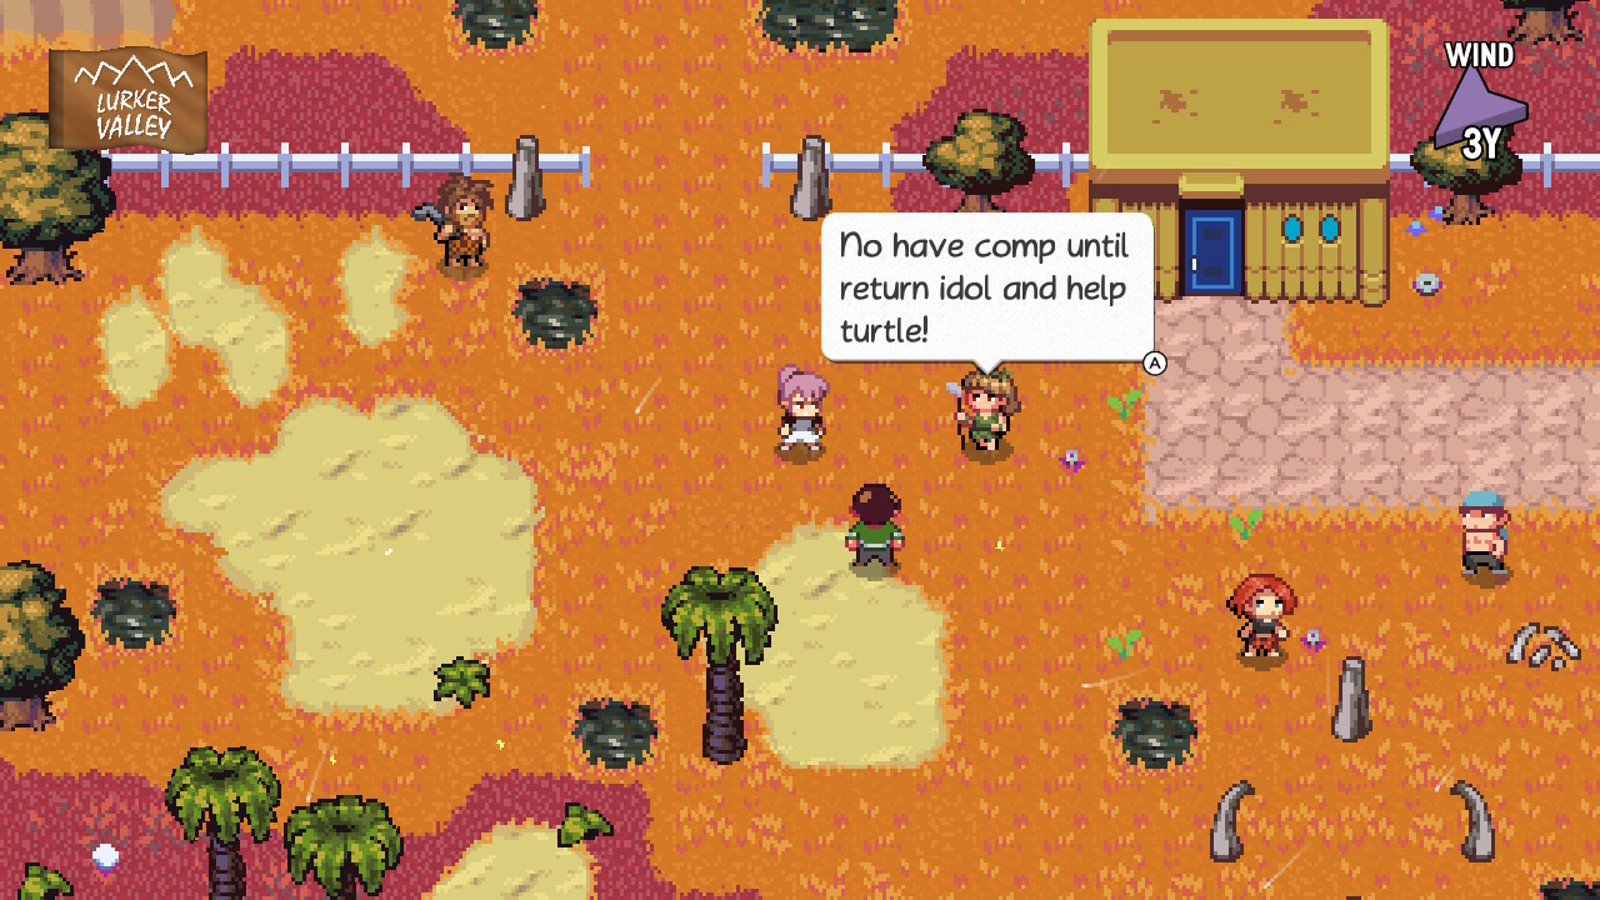 download a golf story for free